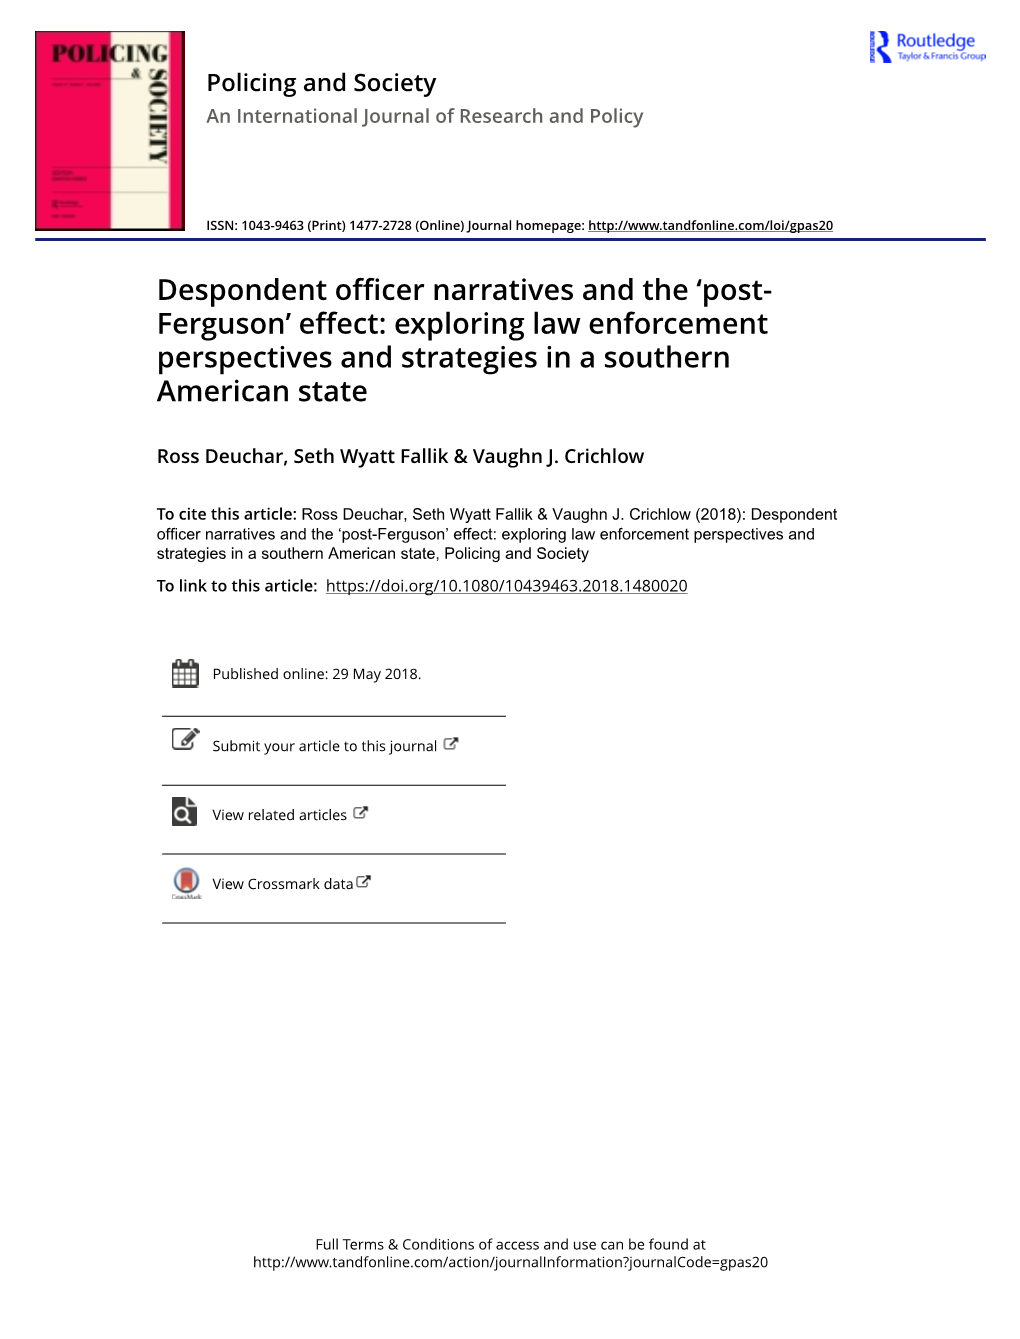 Despondent Officer Narratives and the 'Post-Ferguson' Effect: Exploring Law